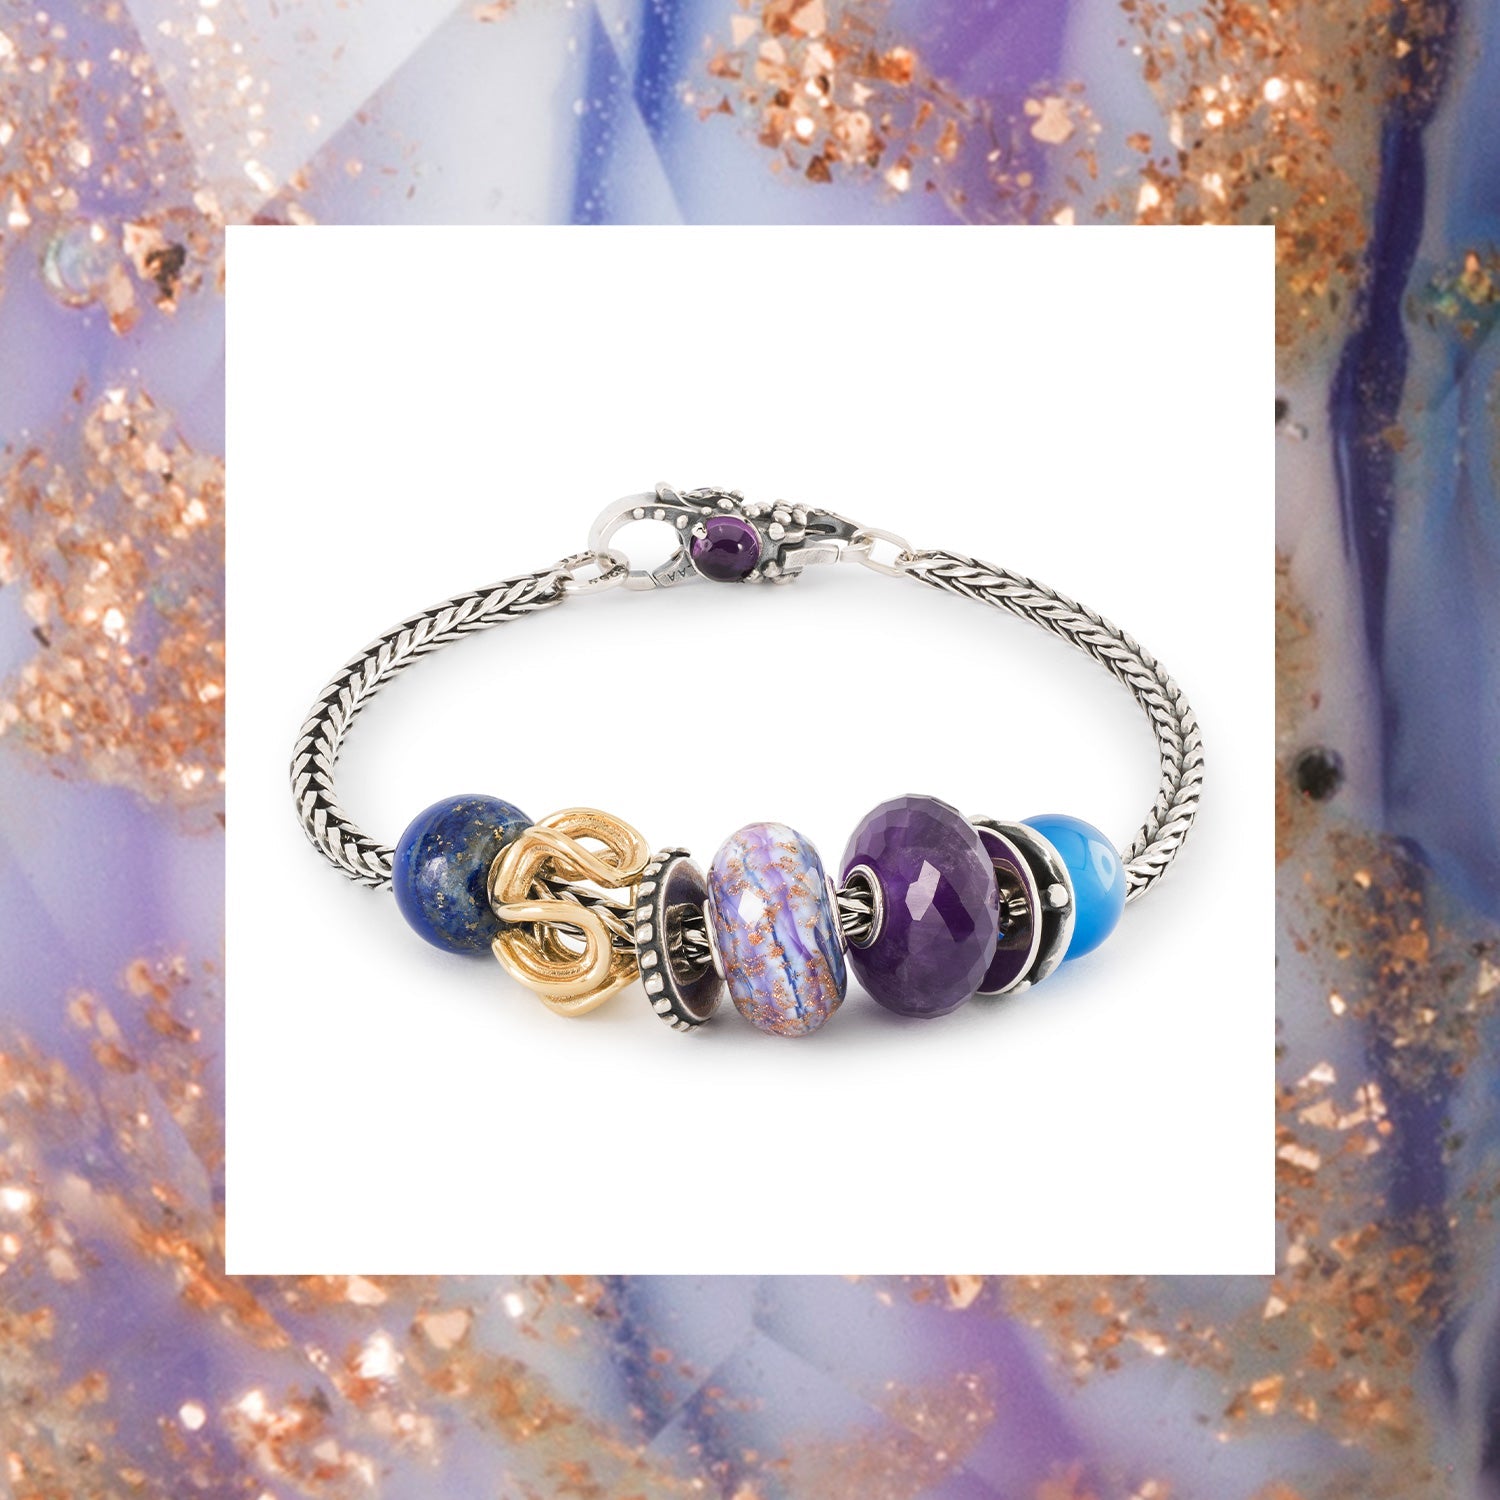 Trollbeads foxtail bracelet with violet and blue hues in gemstone, glass with gold and silver beads 